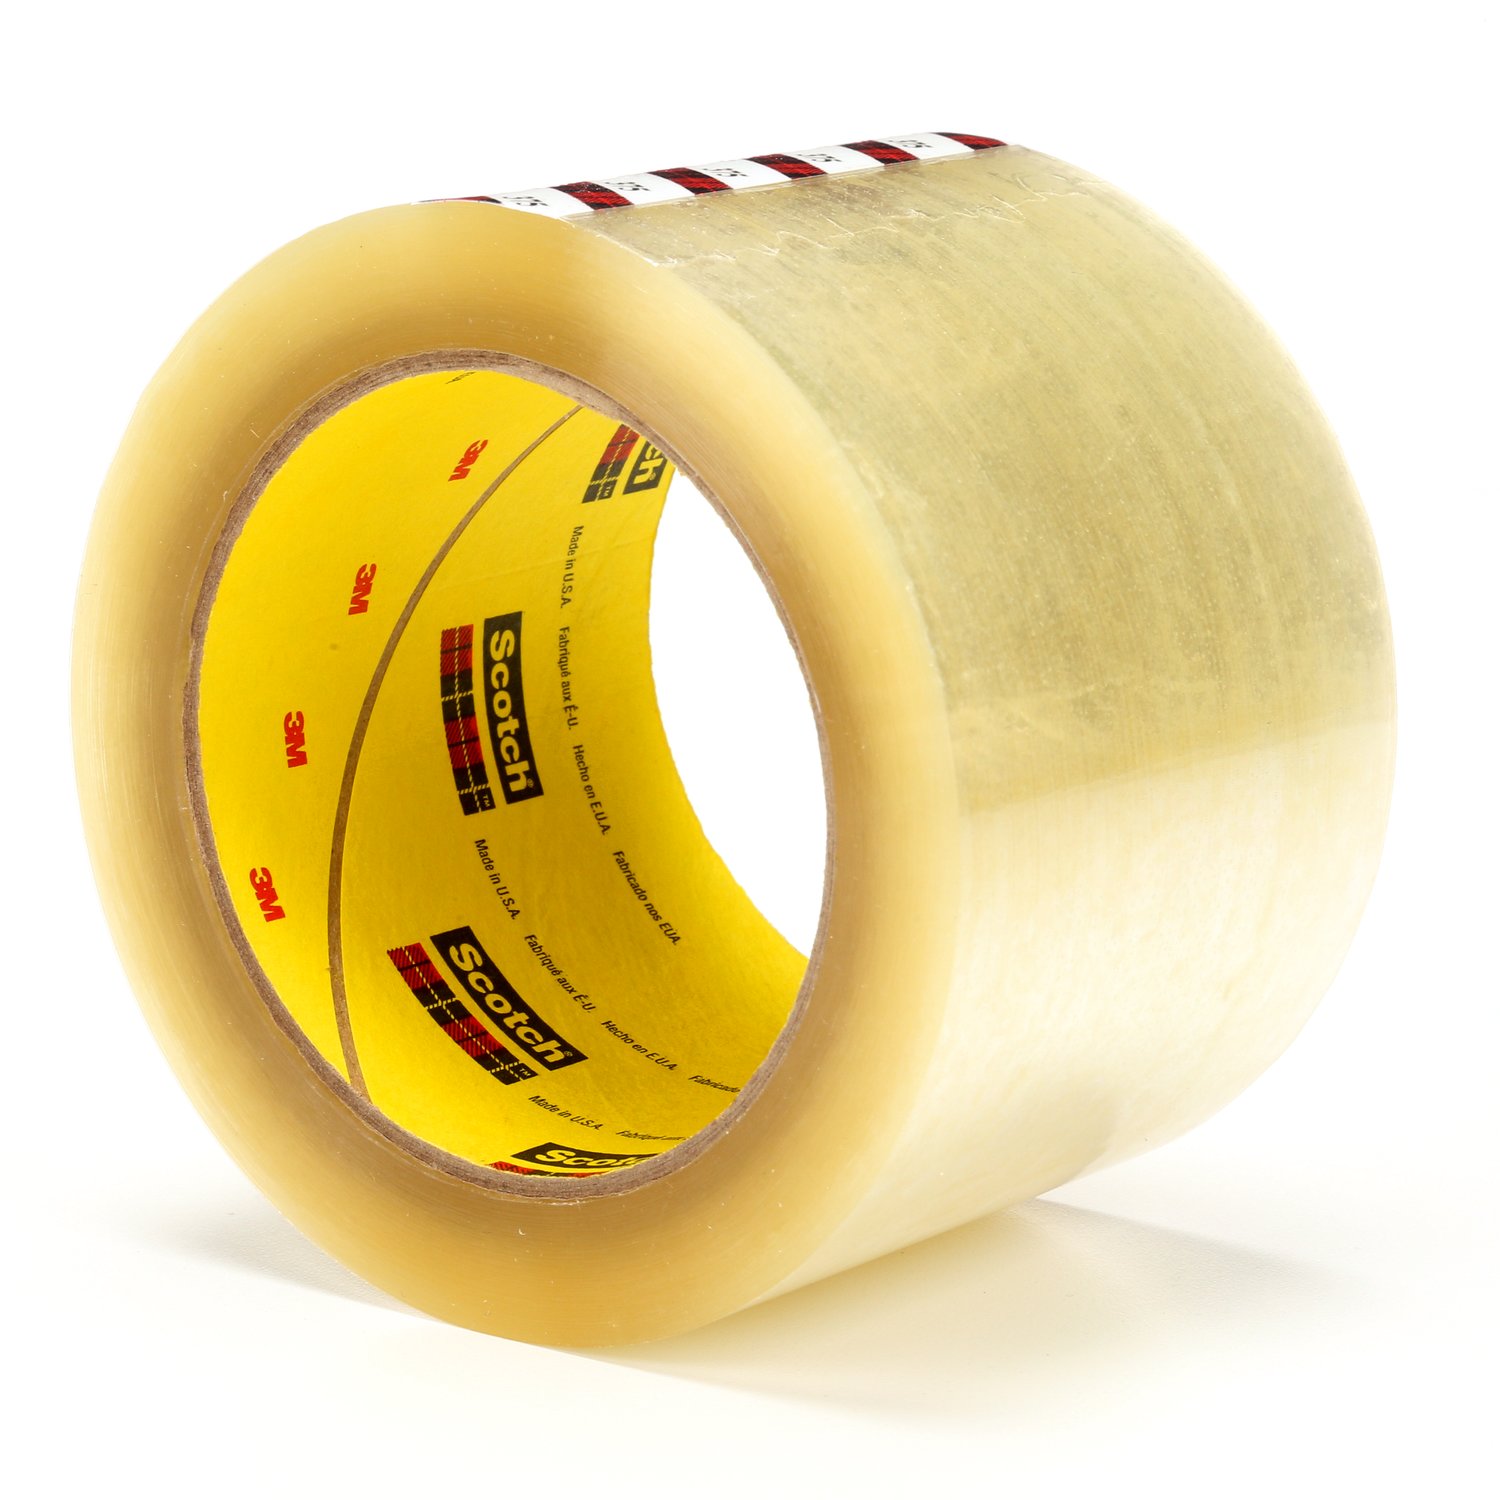 3M Scotch tape Cat 136 double sided permanent tape 1/2 X 250 72  Rolls/case